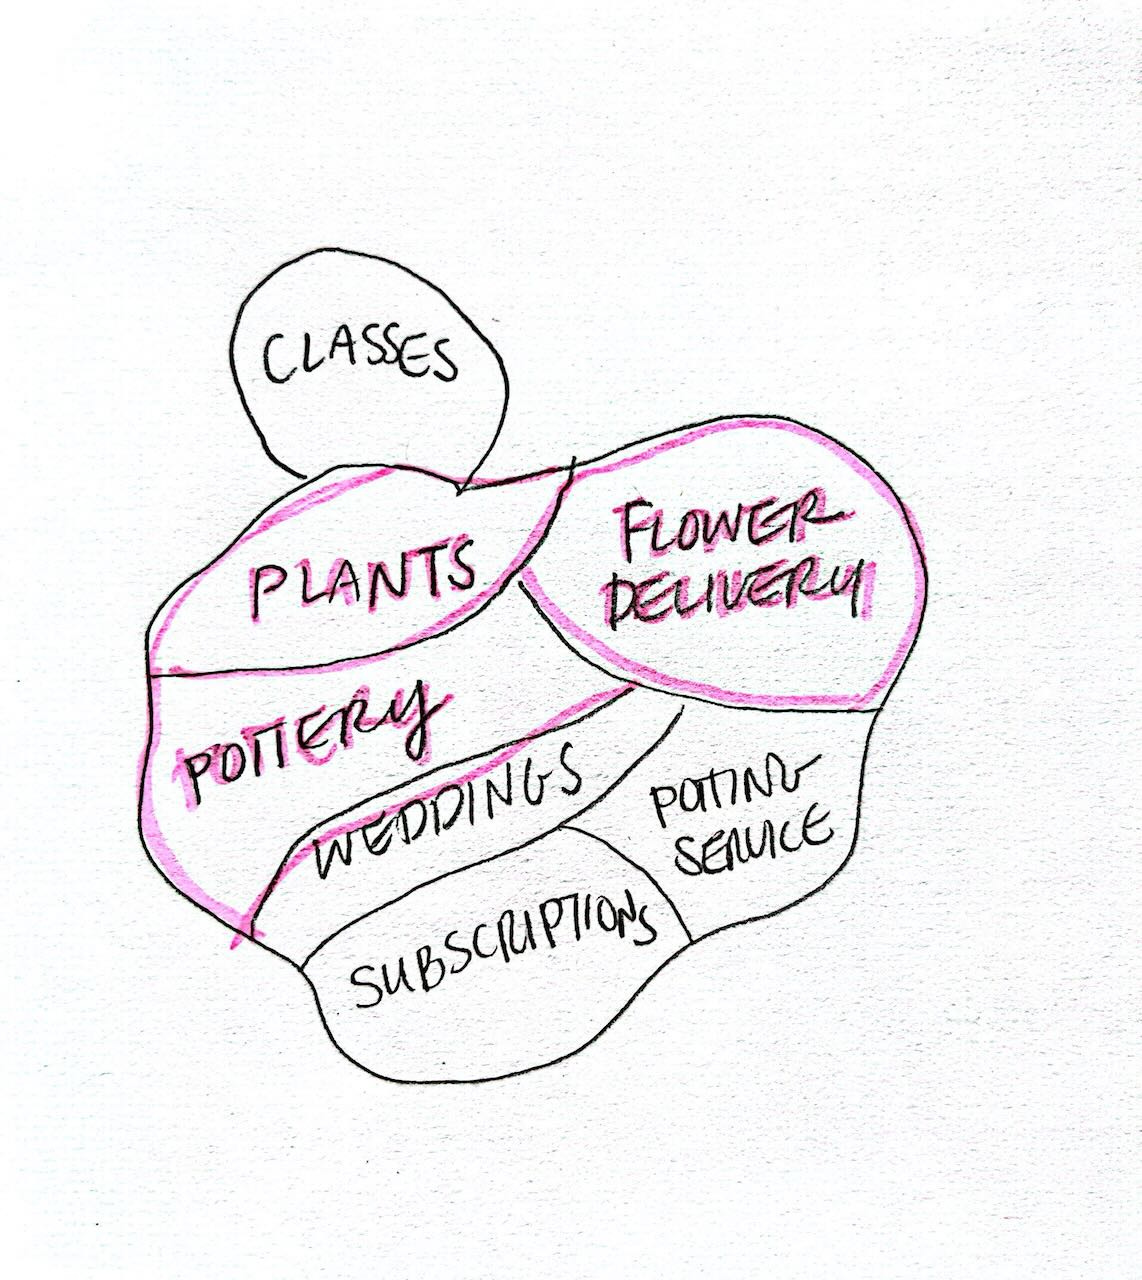 A hand-drawn diagram with various business segments in a clustered layout. The segments are labeled "Classes," "Plants," "Pottery," "Flower Delivery," "Weddings," "Subscriptions," and "Potting Service," with some segments highlighted in pink.